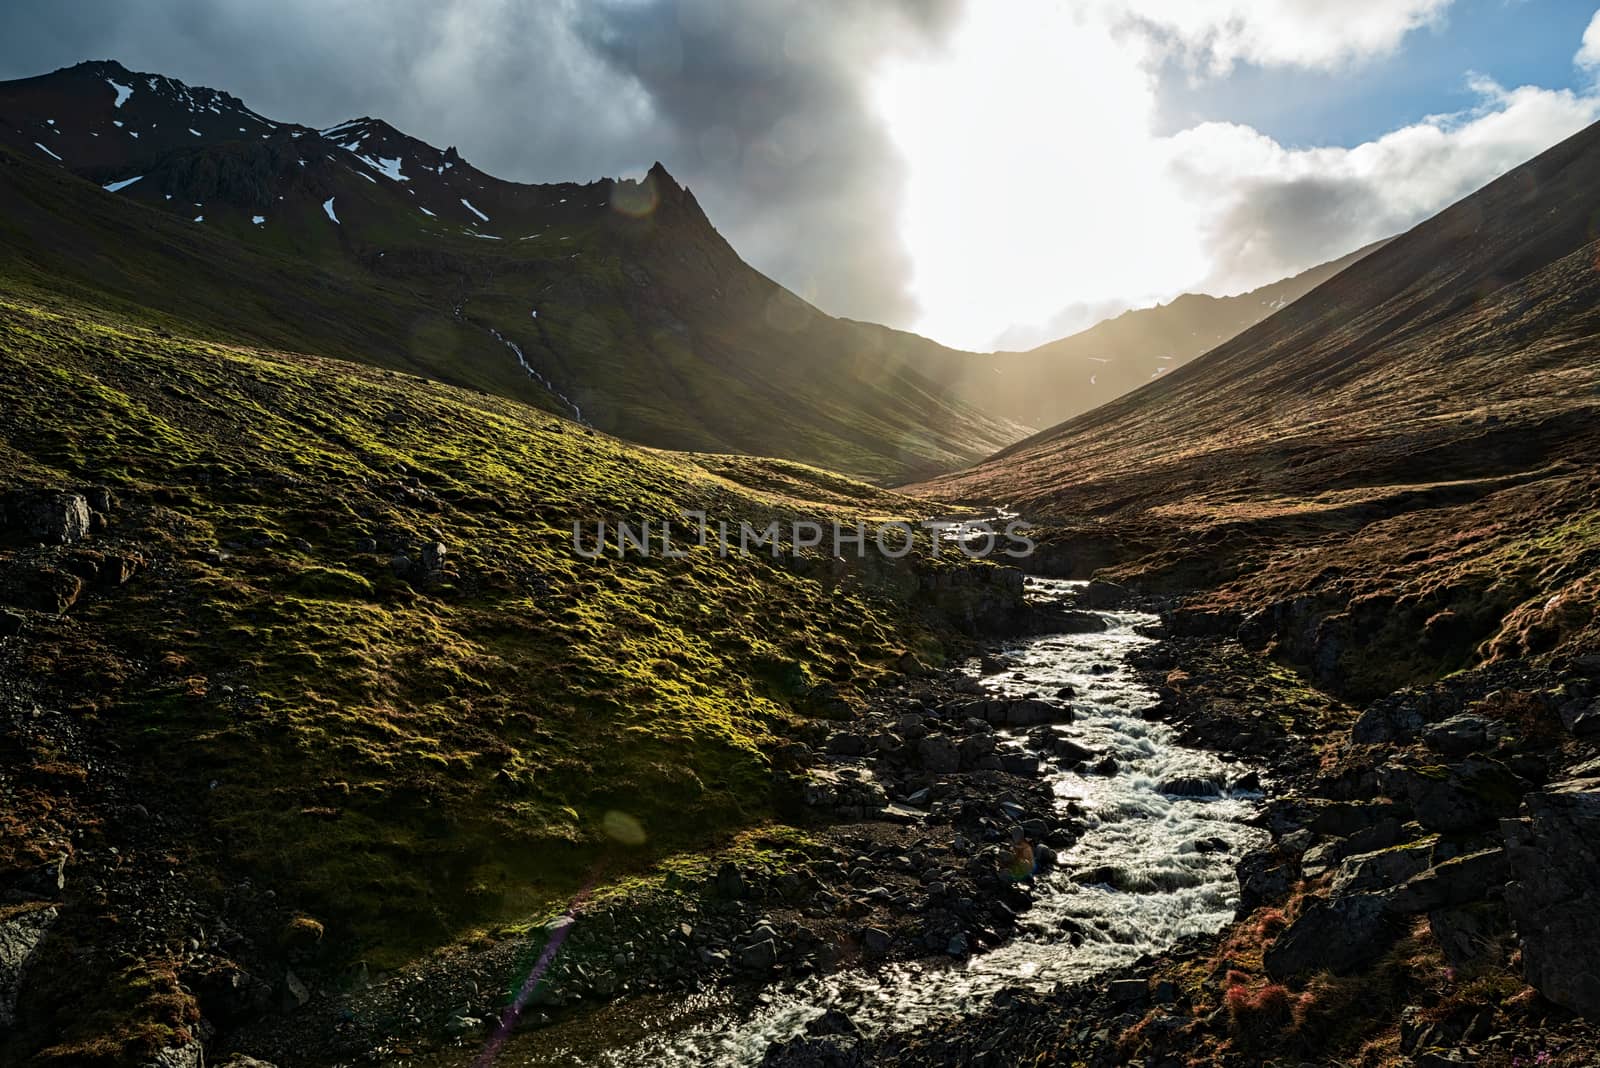 Krossnesfjall mountain and river in backlight on the eastside of Iceland